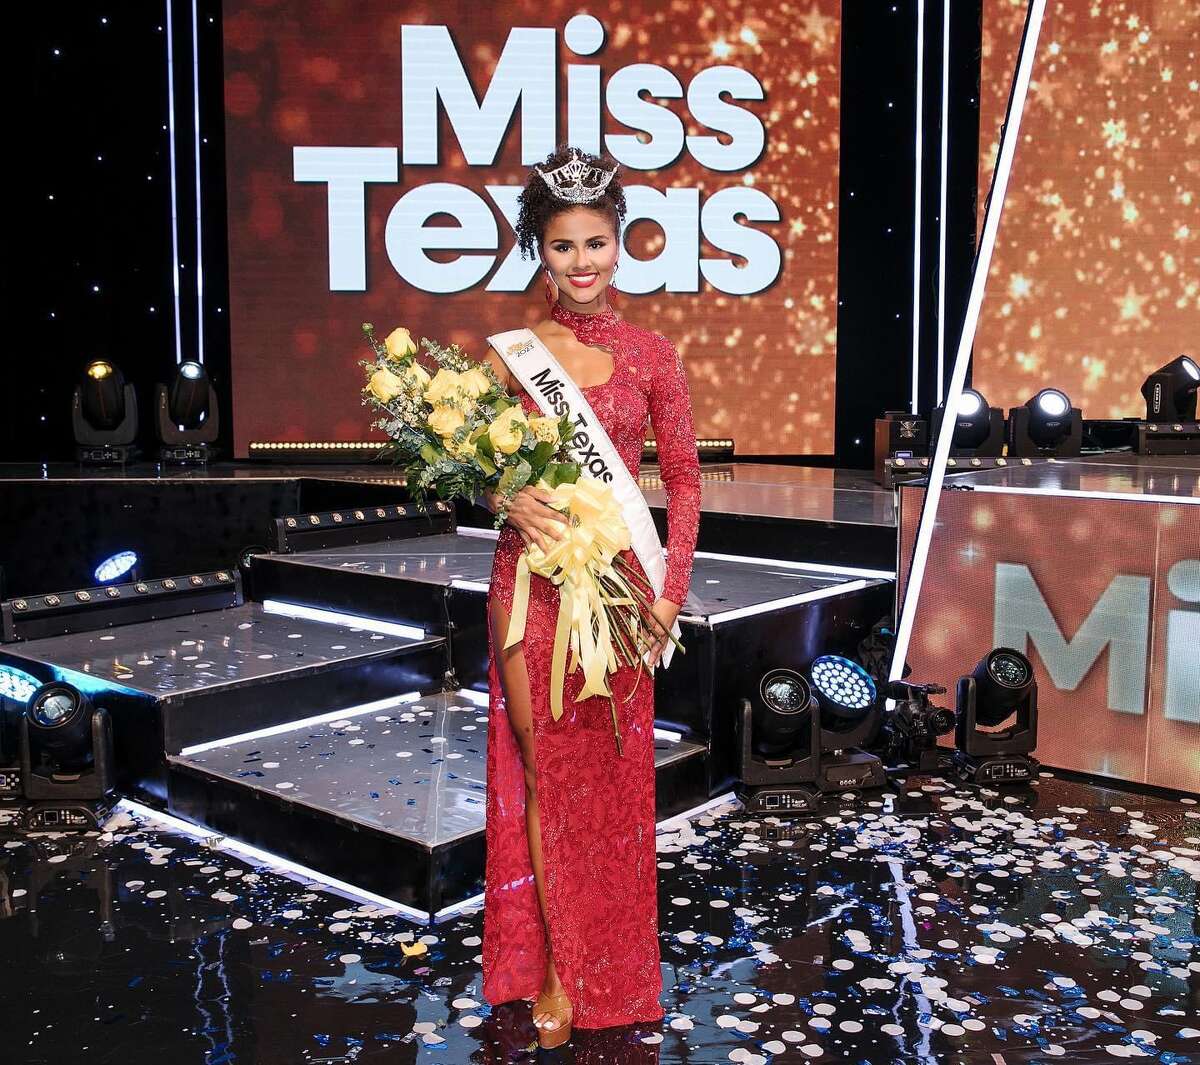 Miss Texas 2023 is a Houston native with high ambitions